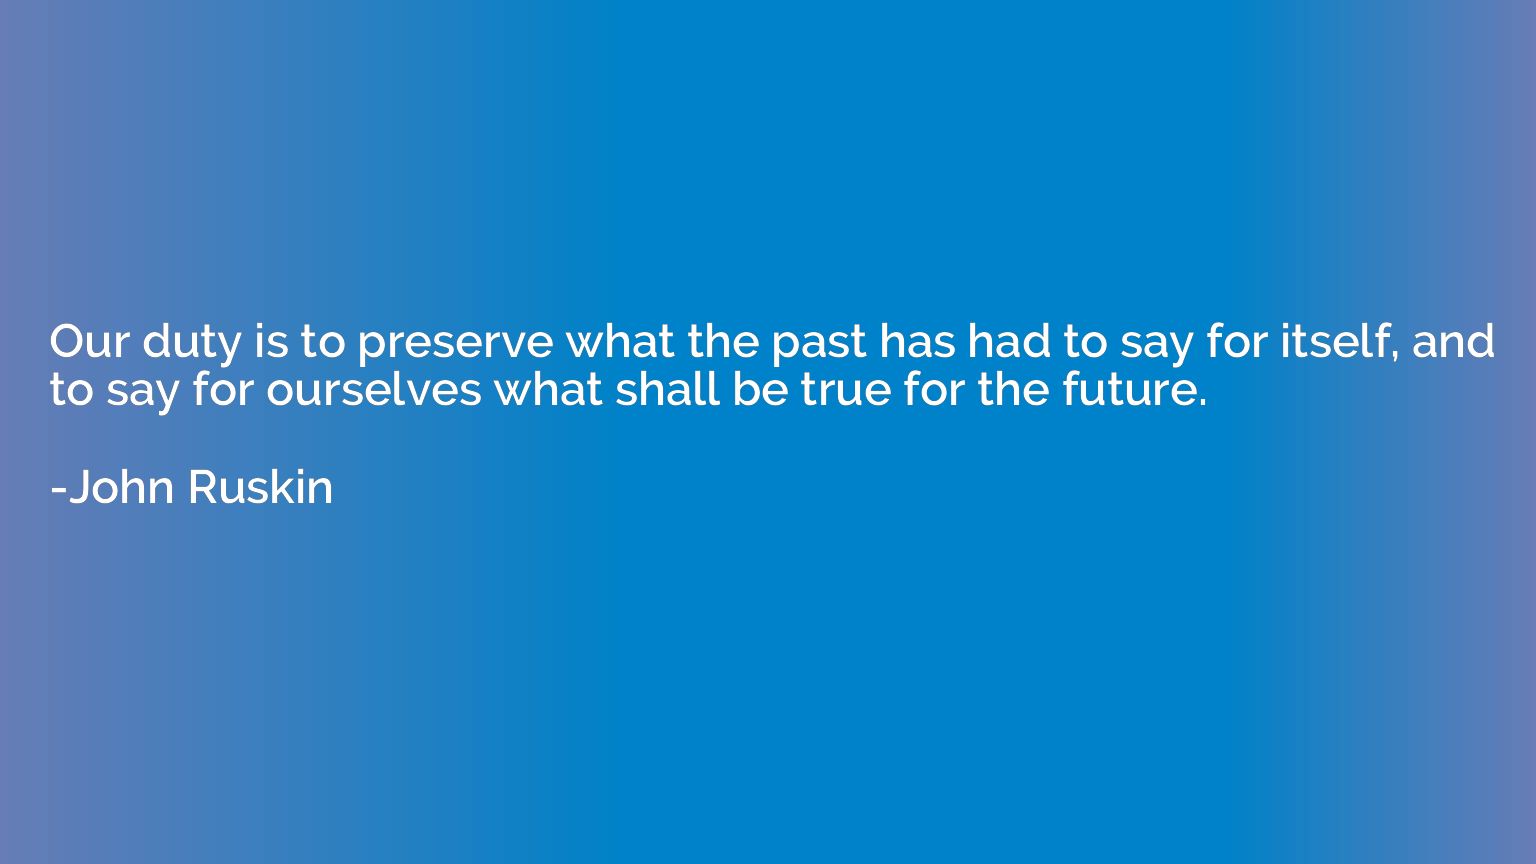 Our duty is to preserve what the past has had to say for its